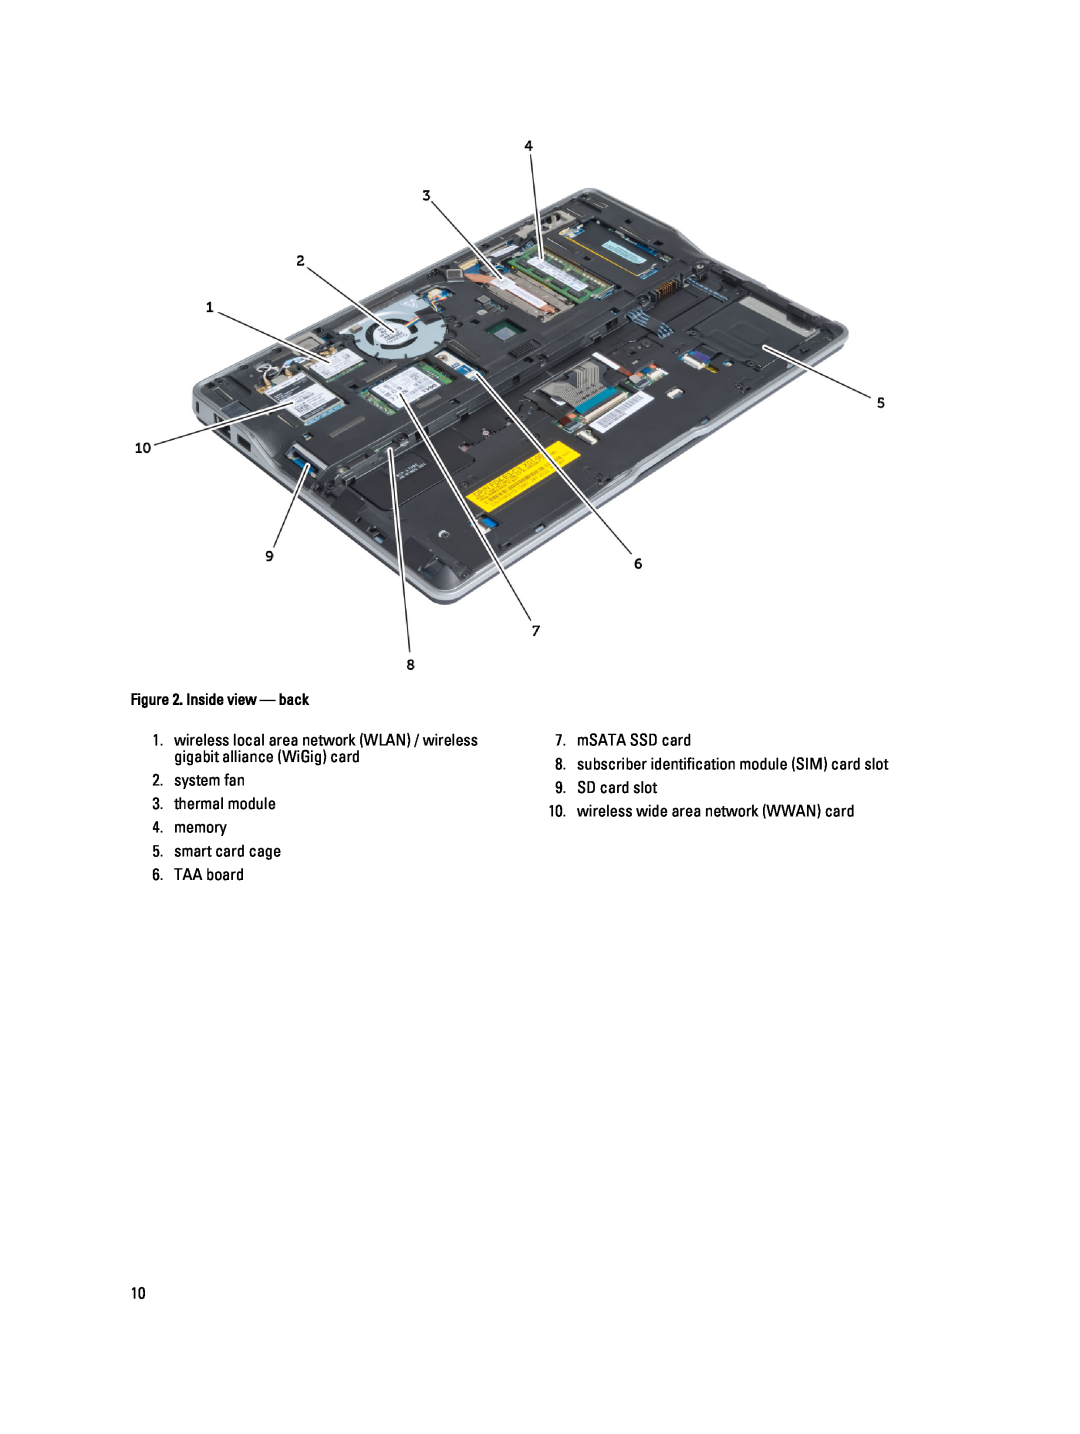 Dell 6430U owner manual system fan 3. thermal module 4. memory 5. smart card cage, TAA board, Inside view - back 